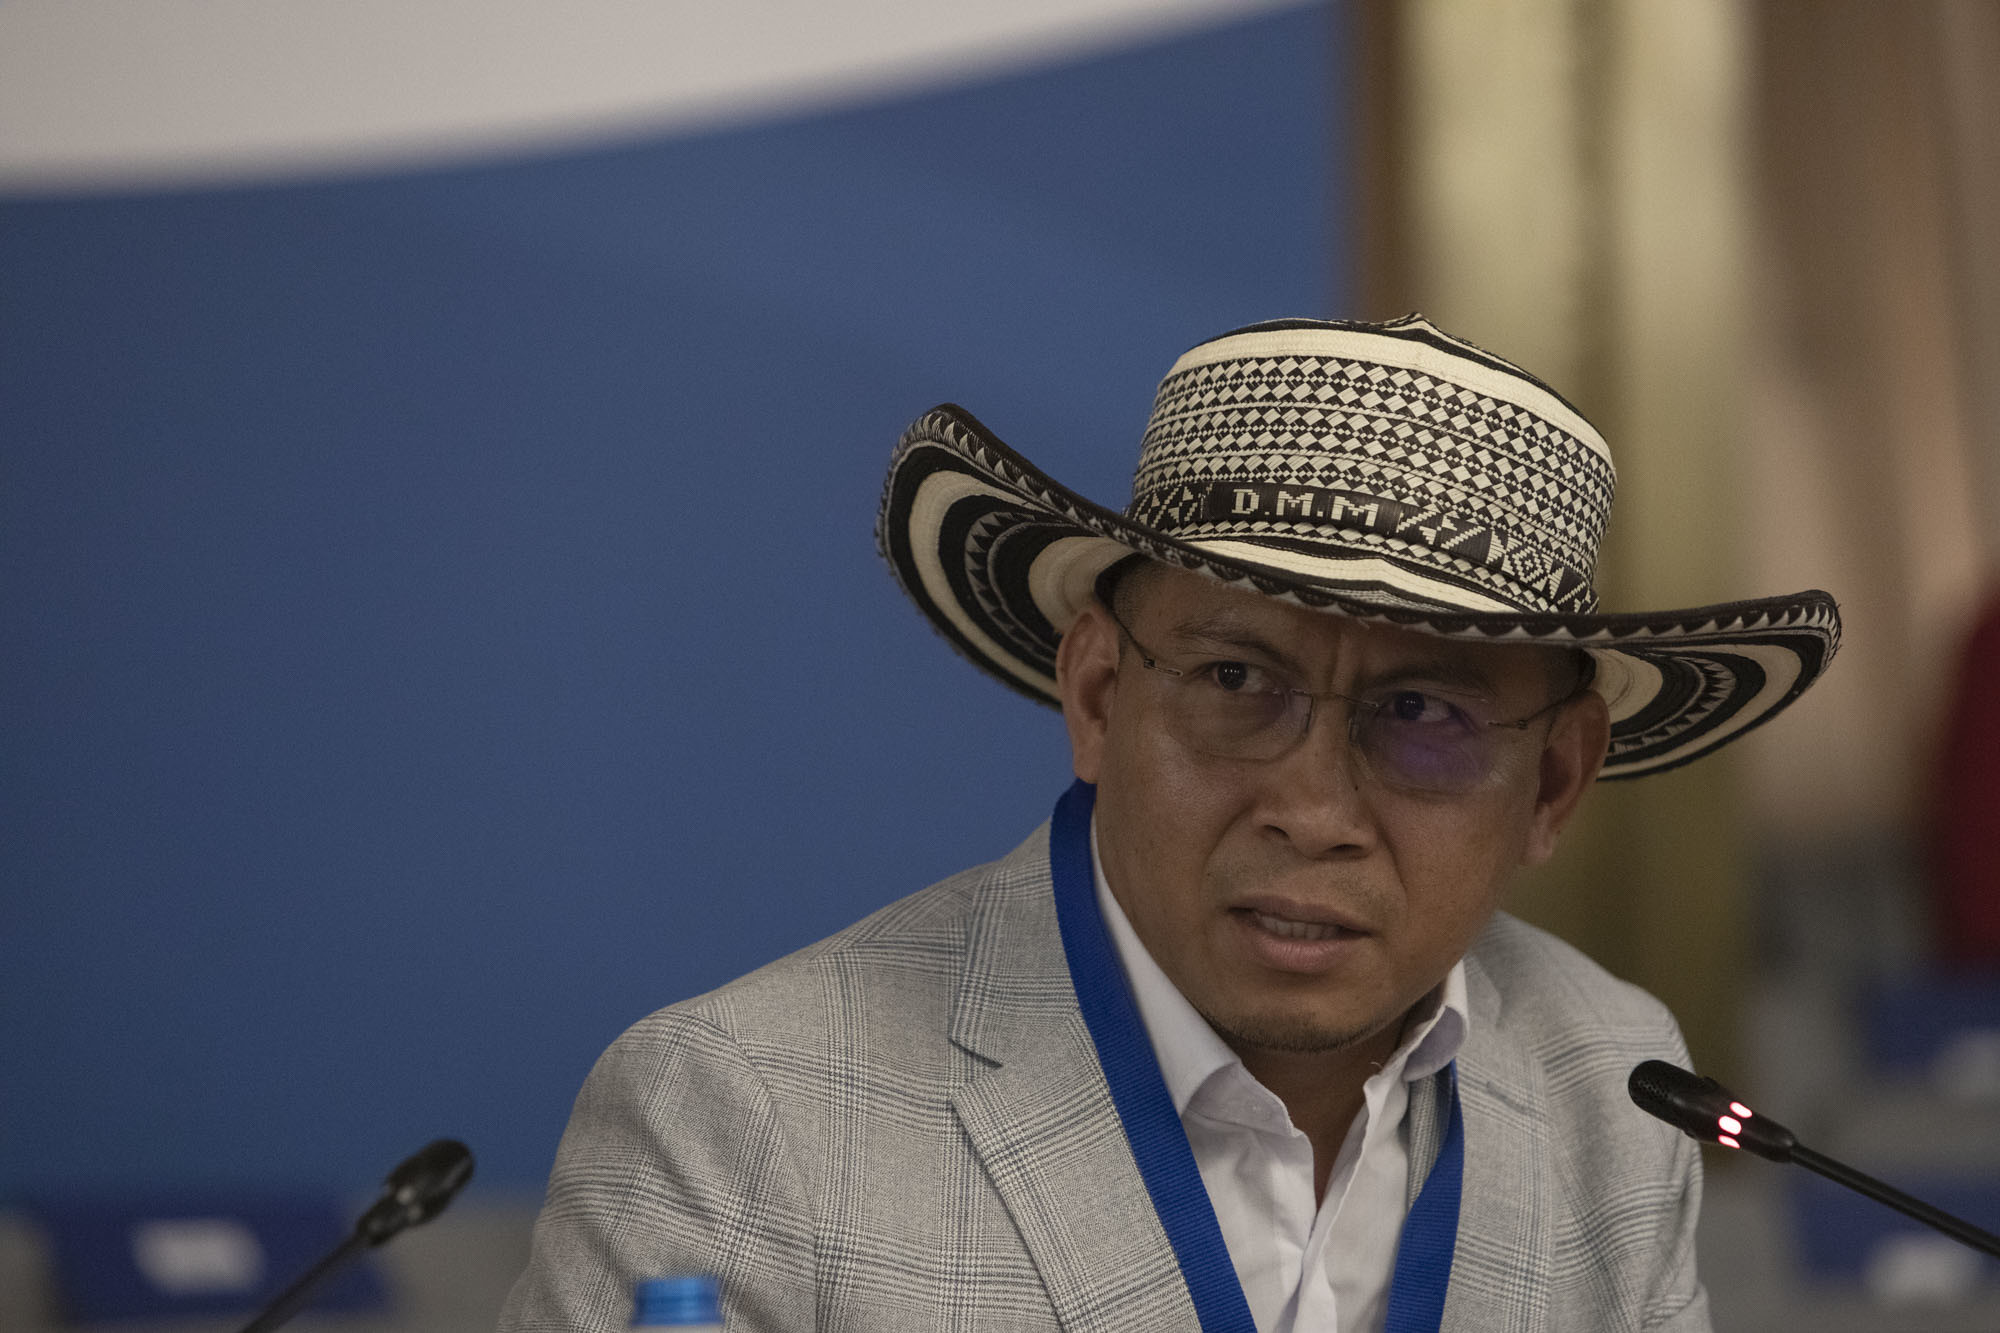 Darío Mejía Montalvo, chair of the UN Permanent Forum on Indigenous Issues, speaking at the SDG 16 Conference in Rome, Italy, in June 2023 (Image: IDLO / Flickr, CC BY NC ND 2.0)